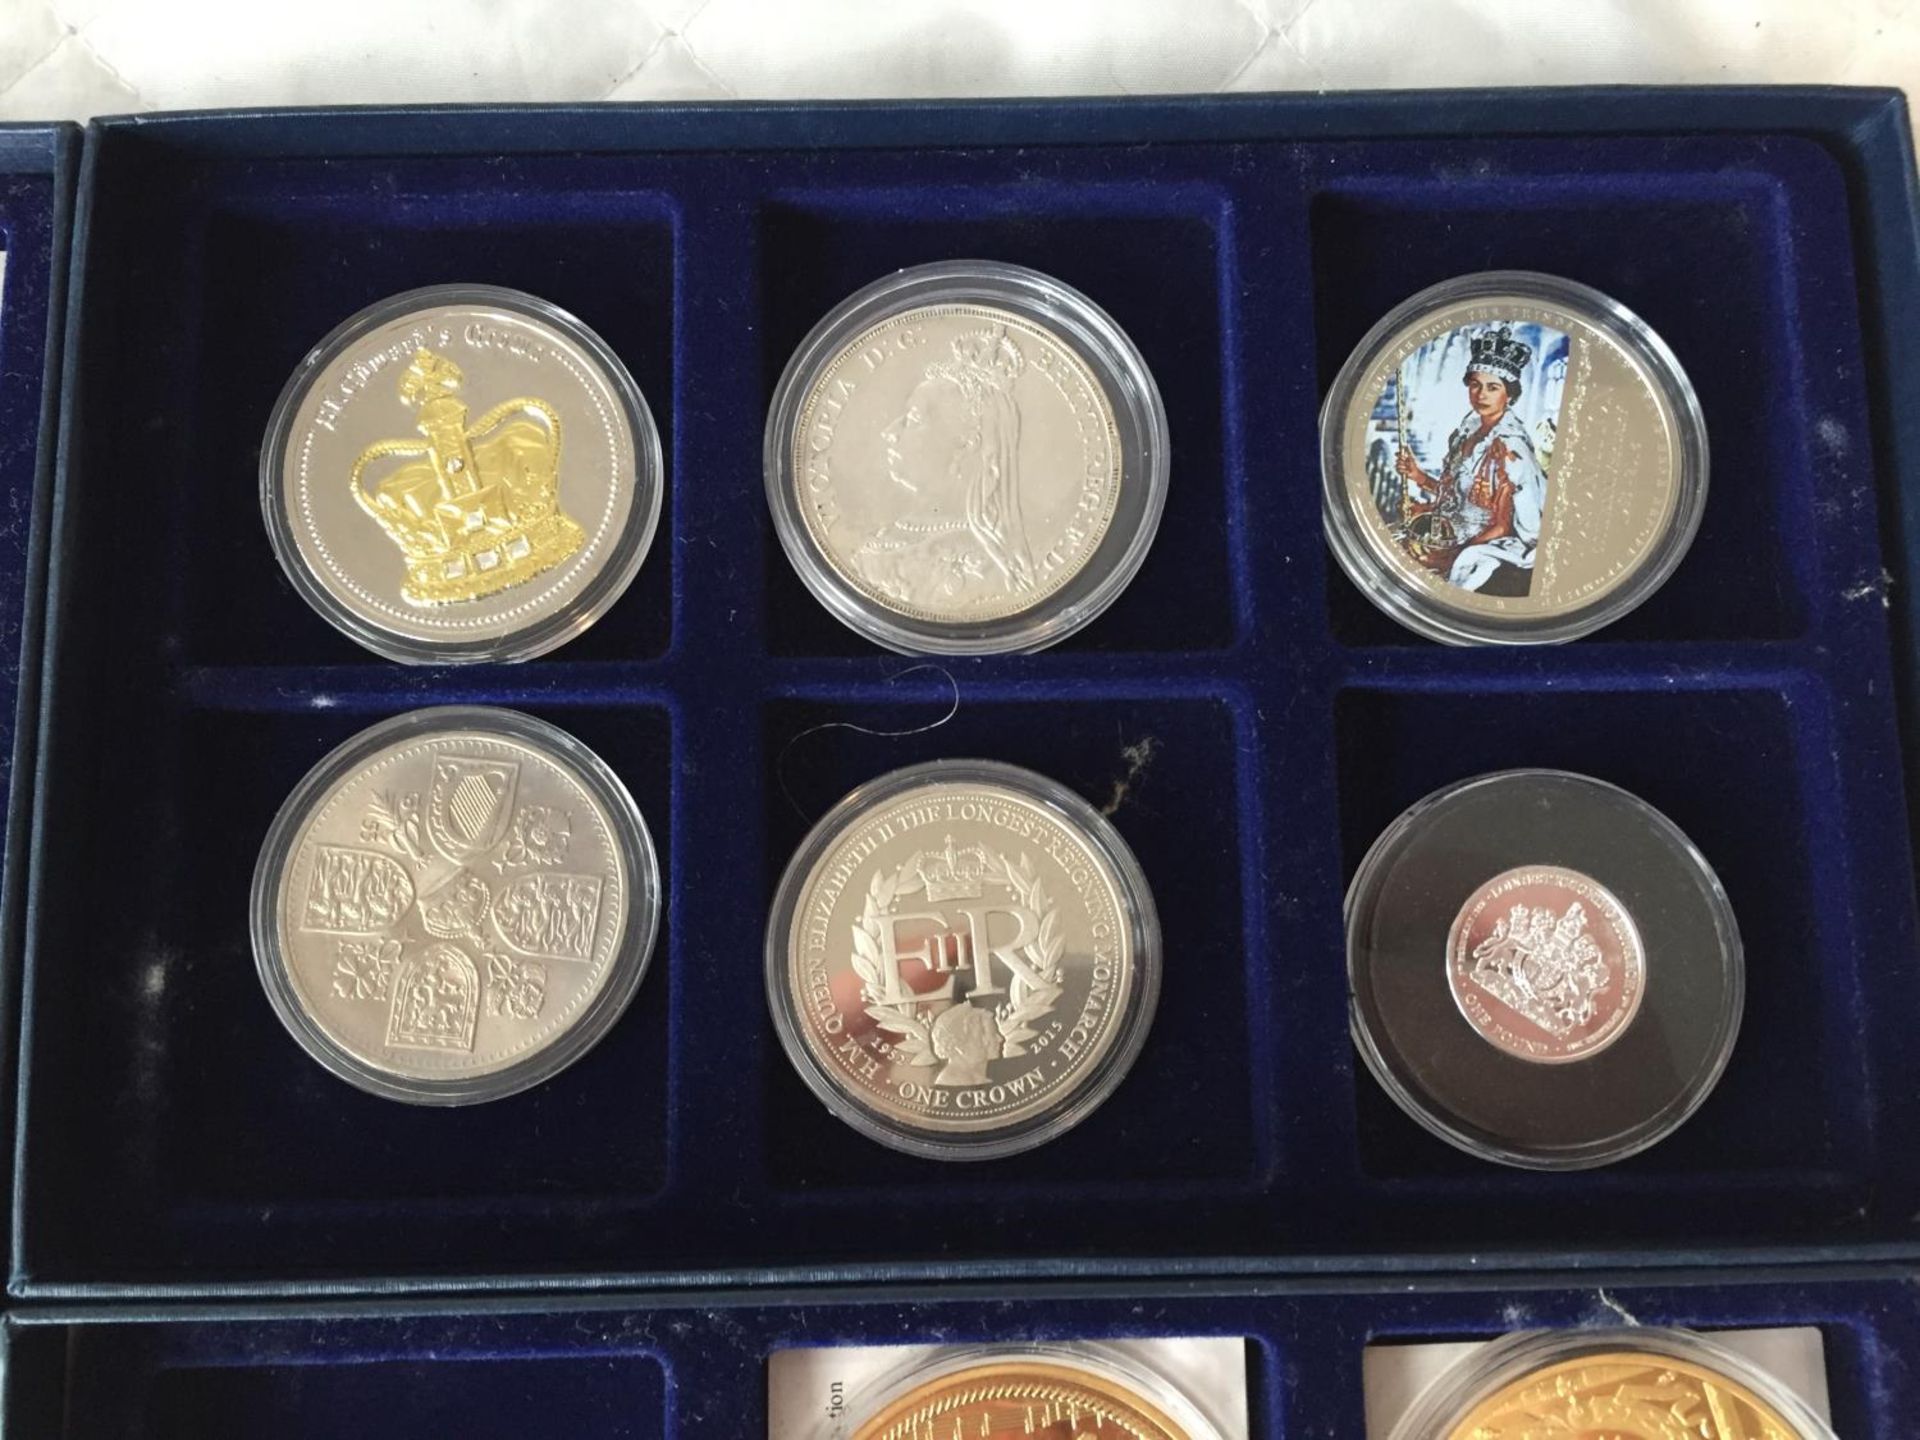 A COLLECTION OF COMMEMORATIVE COINS MOSTLY REPRESENTING VARIOUS MONARCHS ETC. IN CAPSULES, SOME - Image 7 of 7